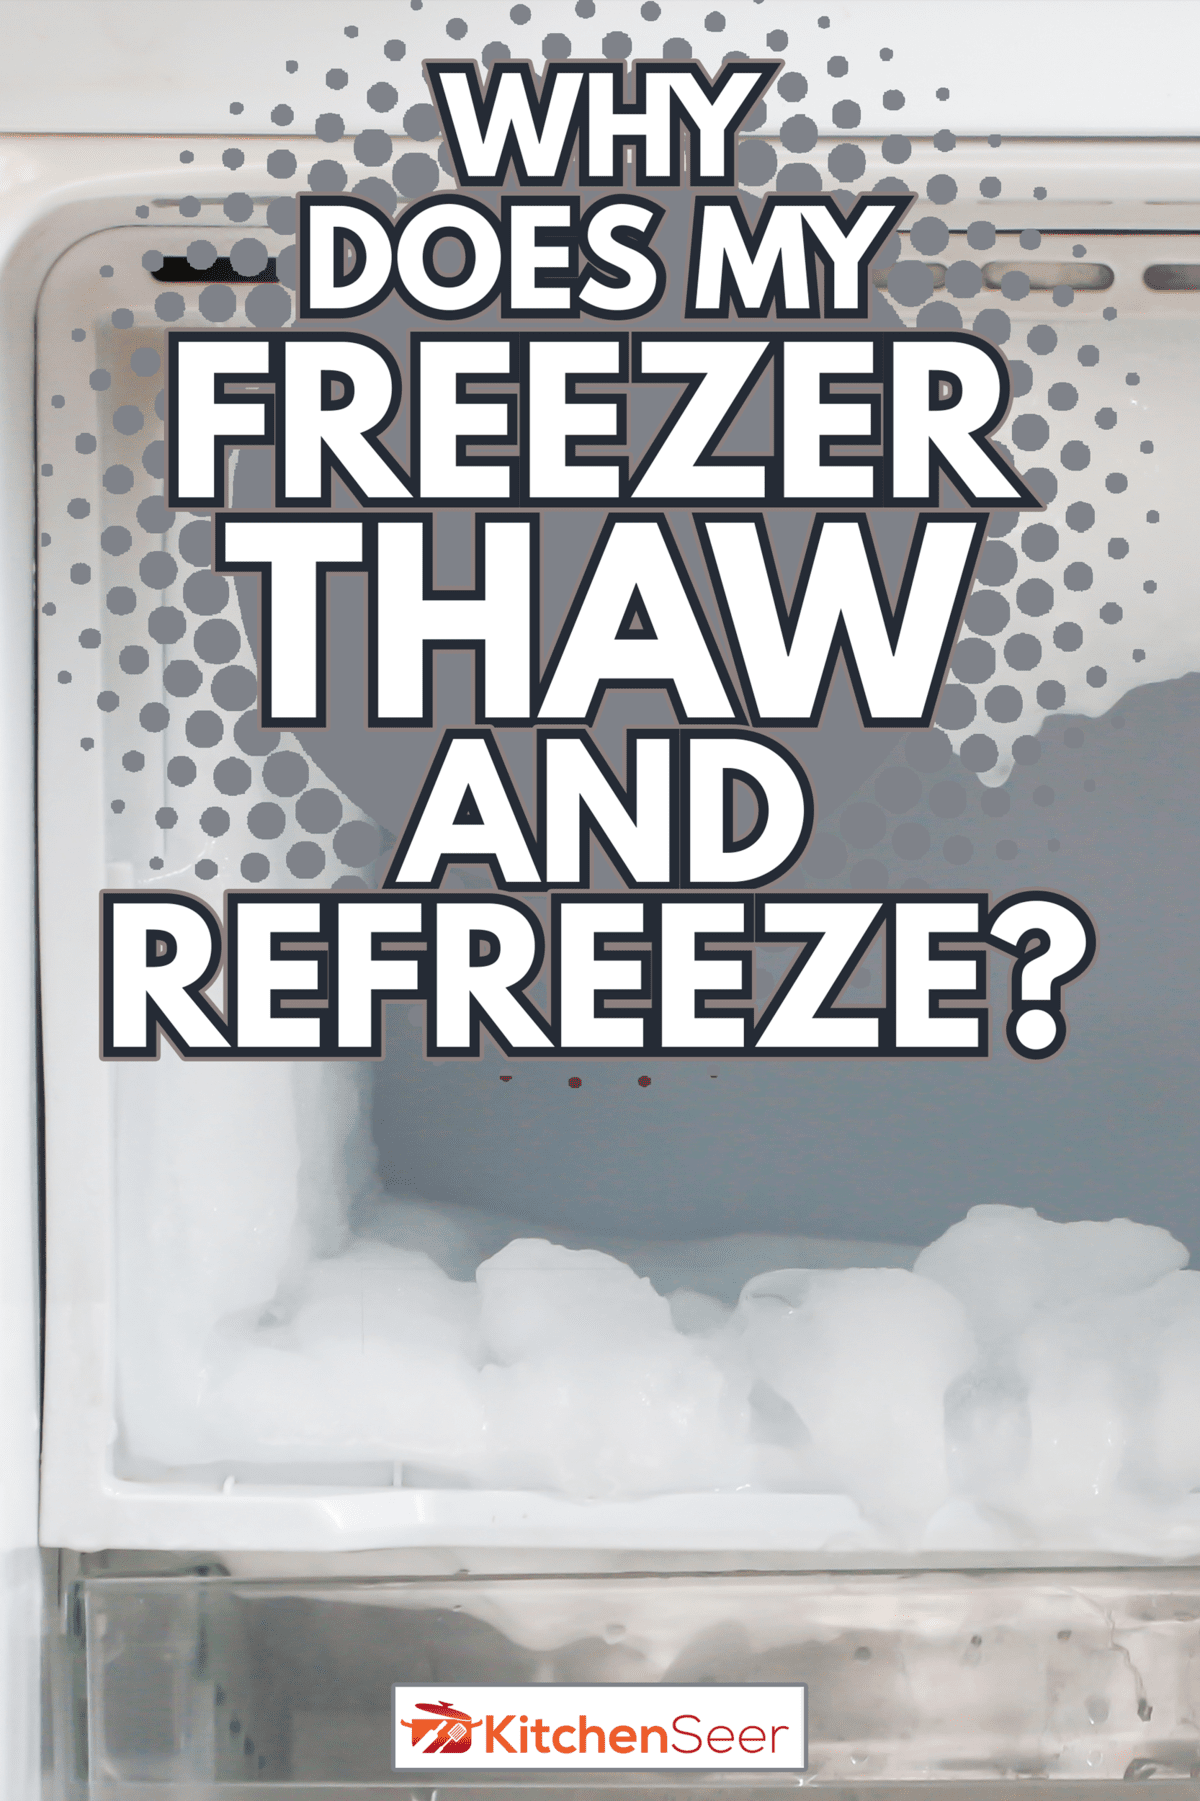 Many Ice frozen in the fridge - Why Does My Freezer Thaw And Refreeze